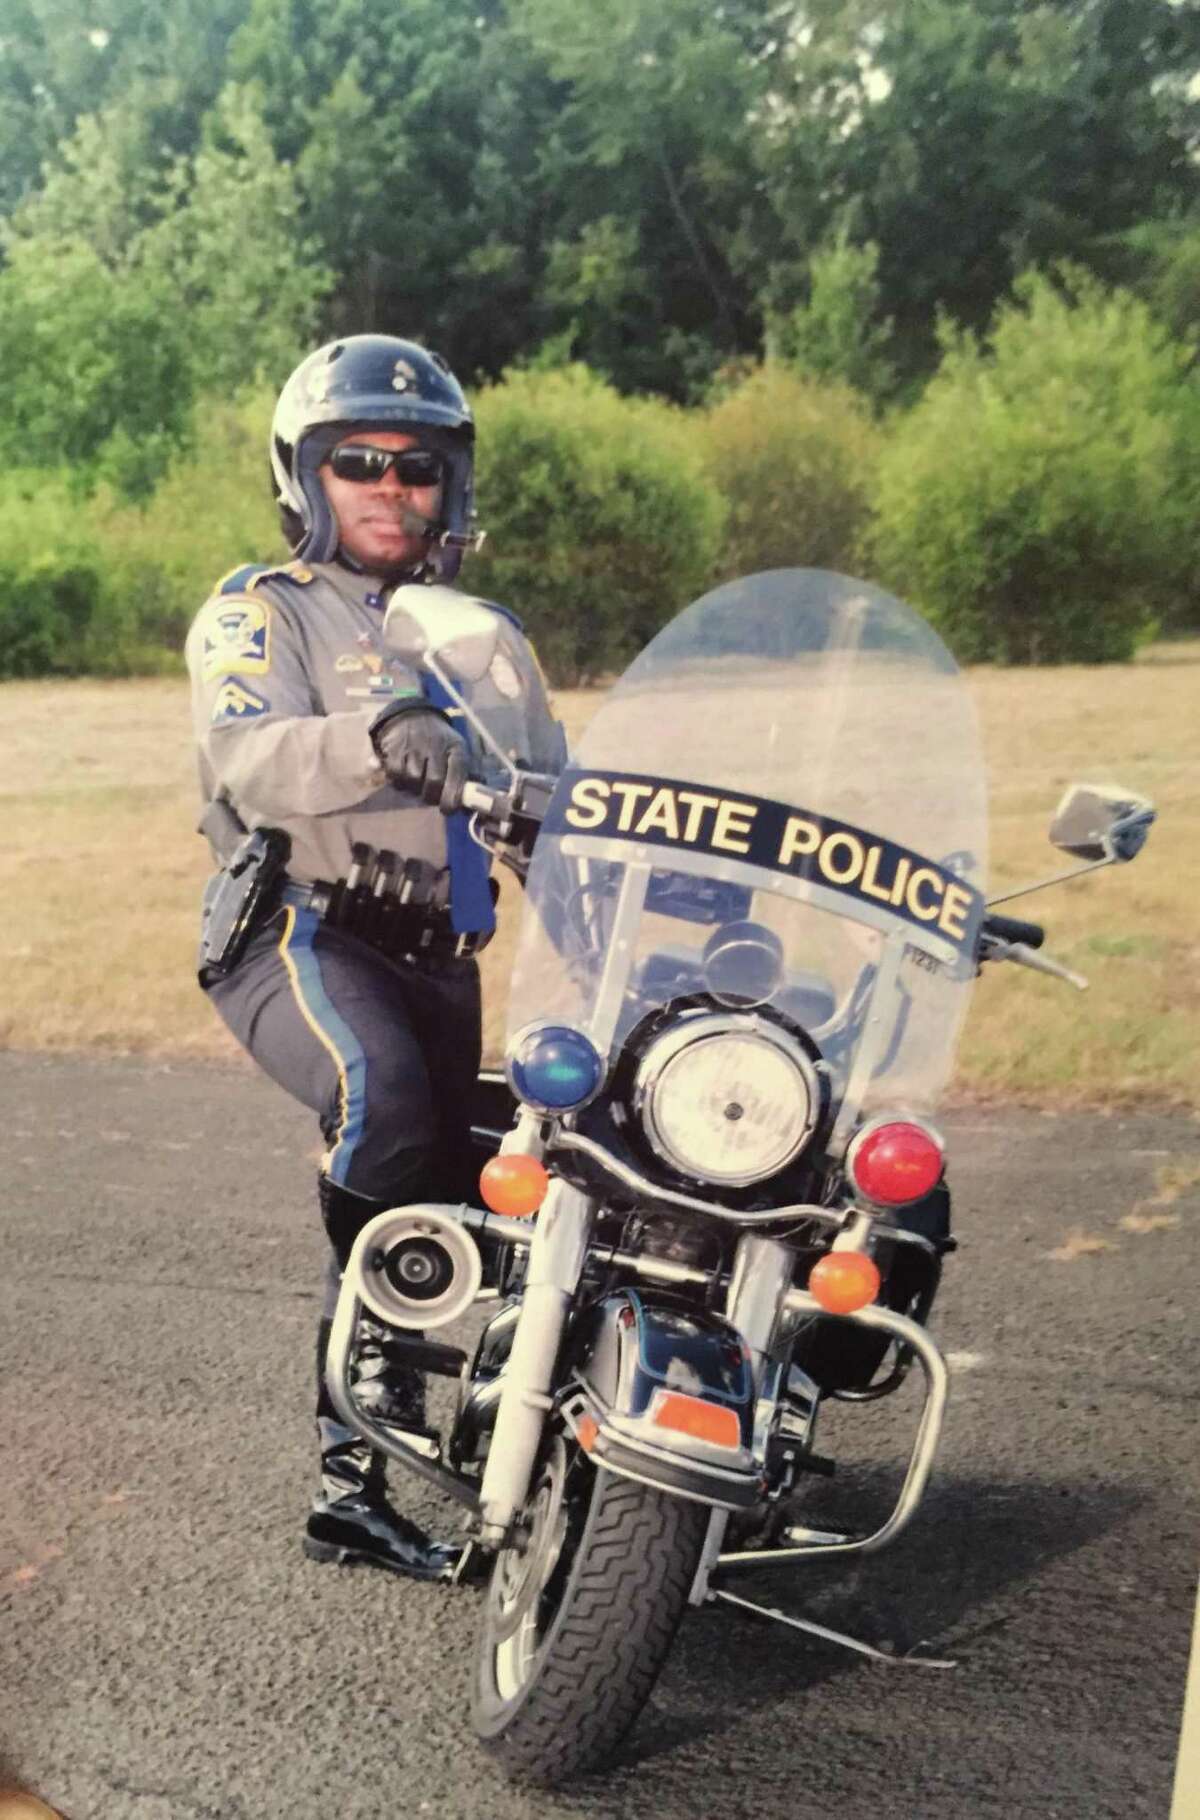 Trooper Walter Greene, Jr., stands next to his state police motorcycle in this updated photo.